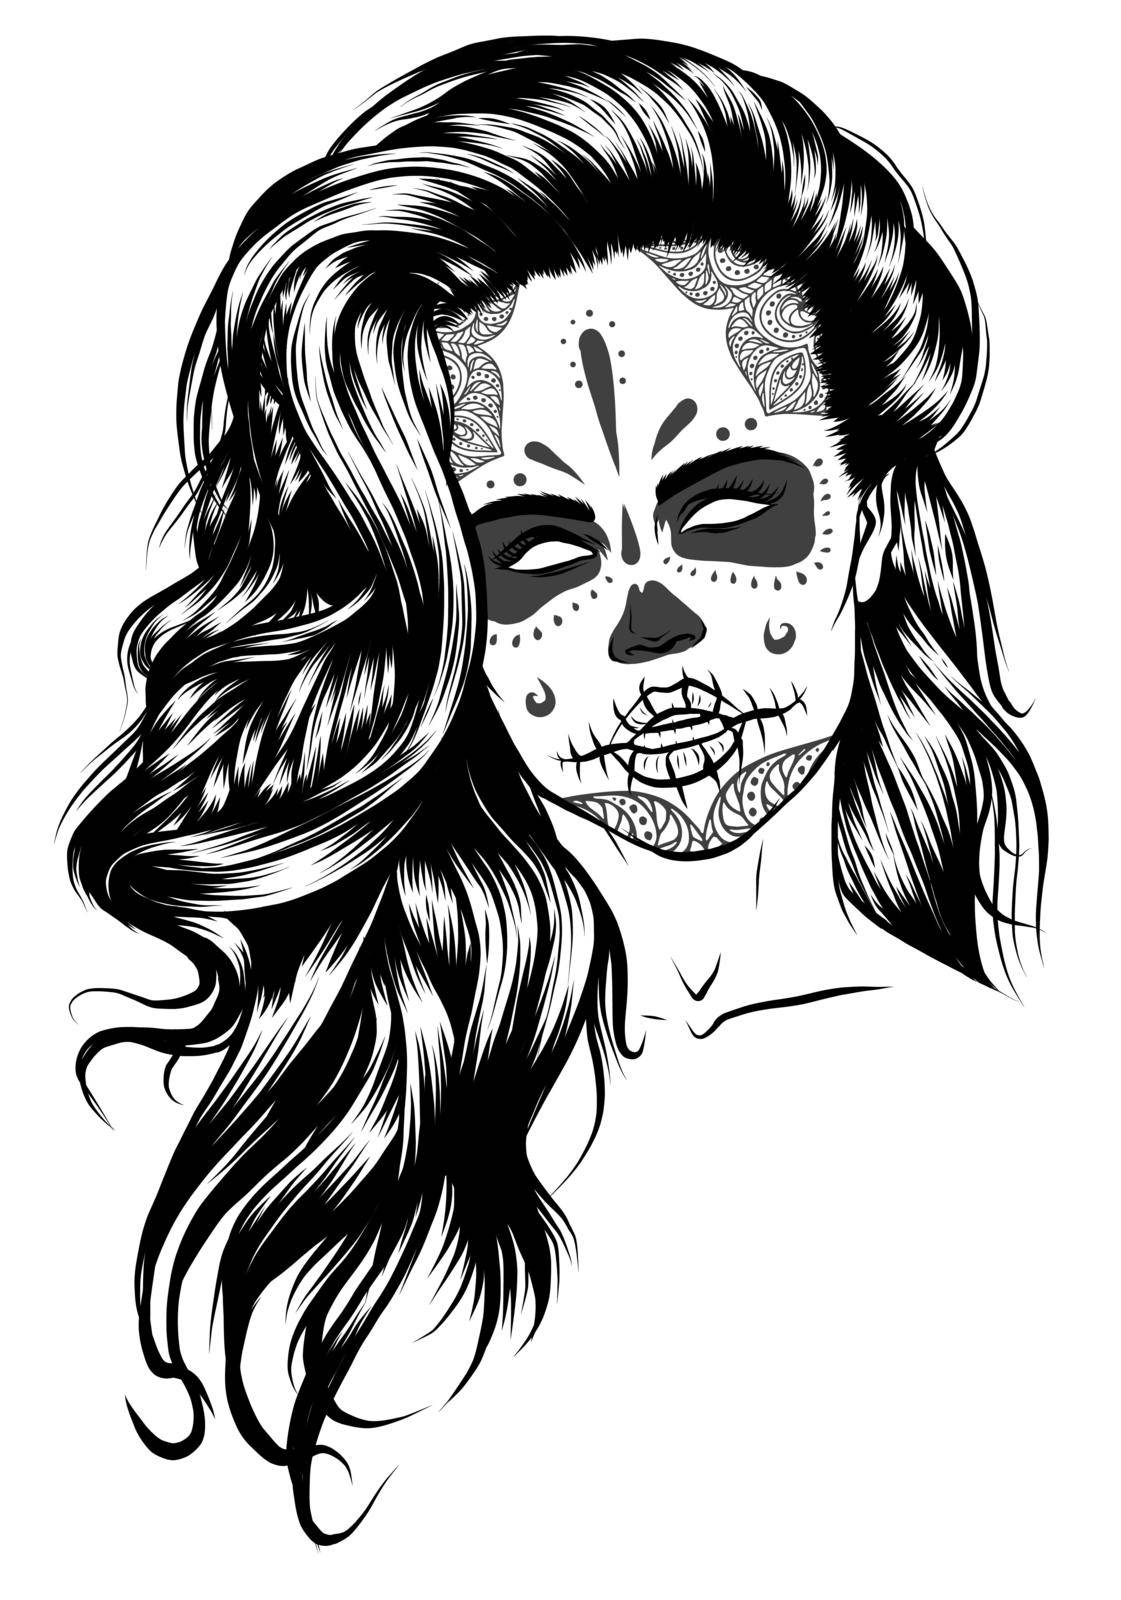 Illustration of black and white skull girl with rose in hairs on white background by dean